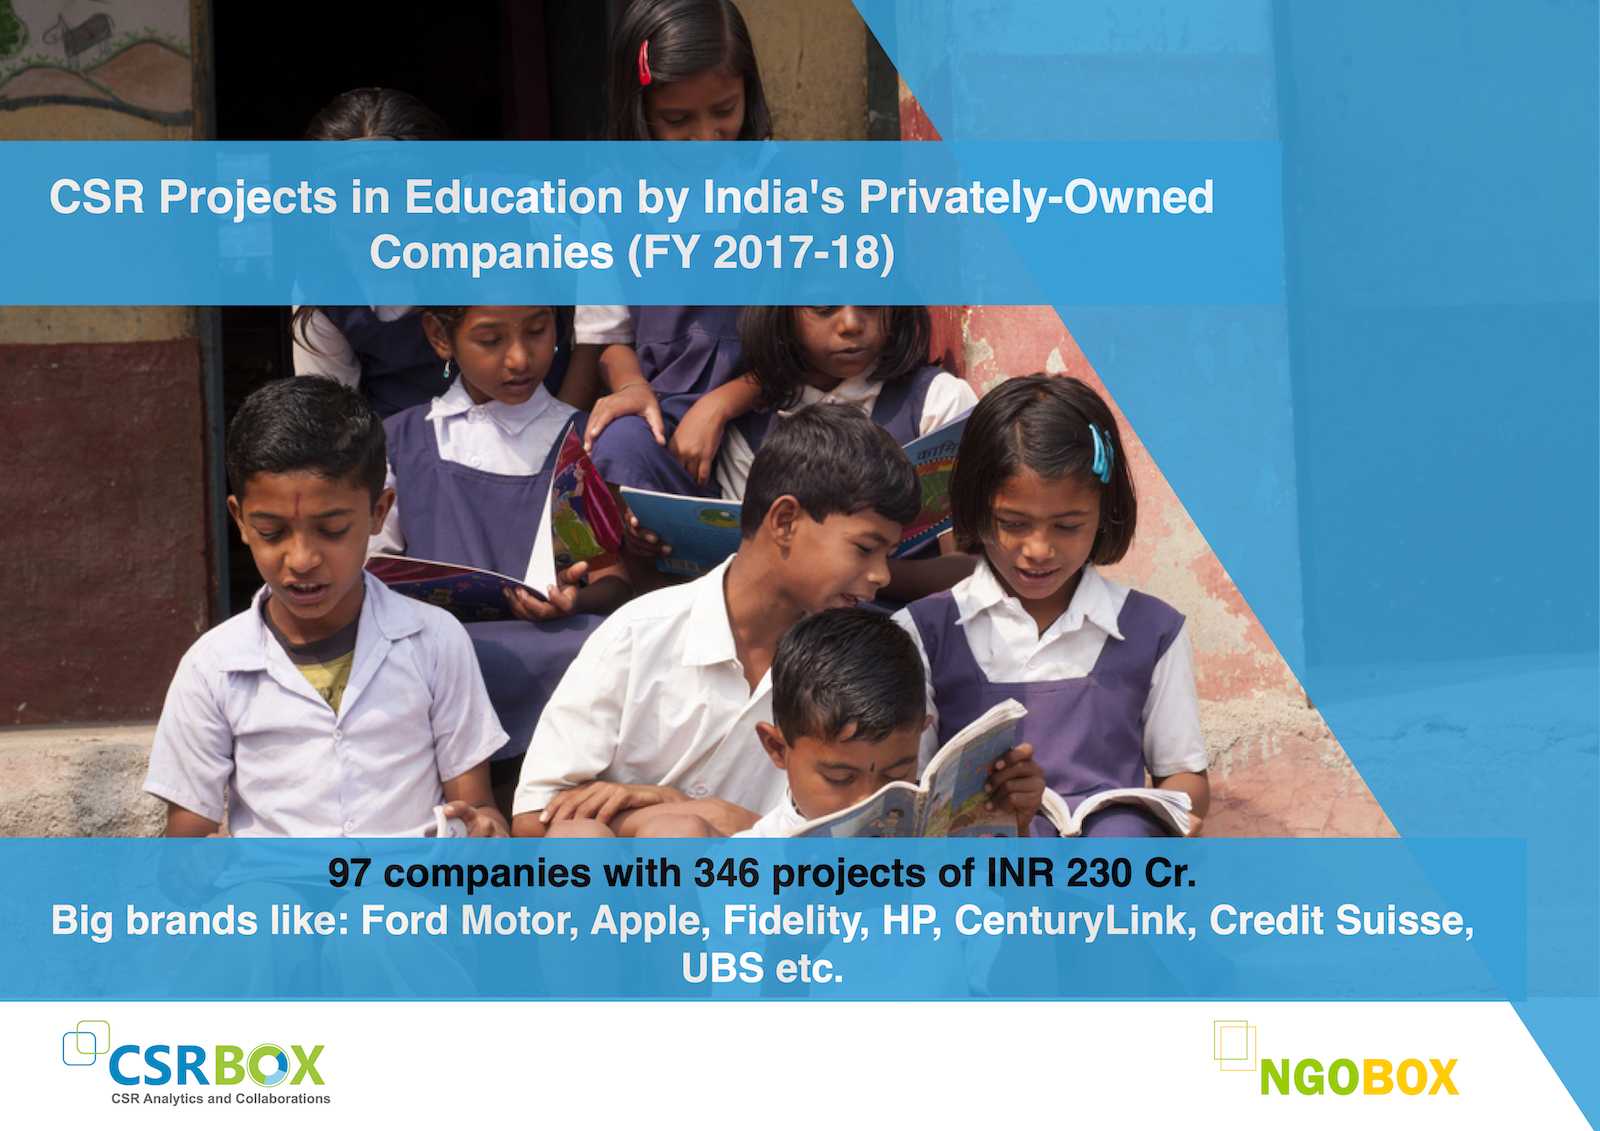 CSR in Education in India's Privately-owned companies